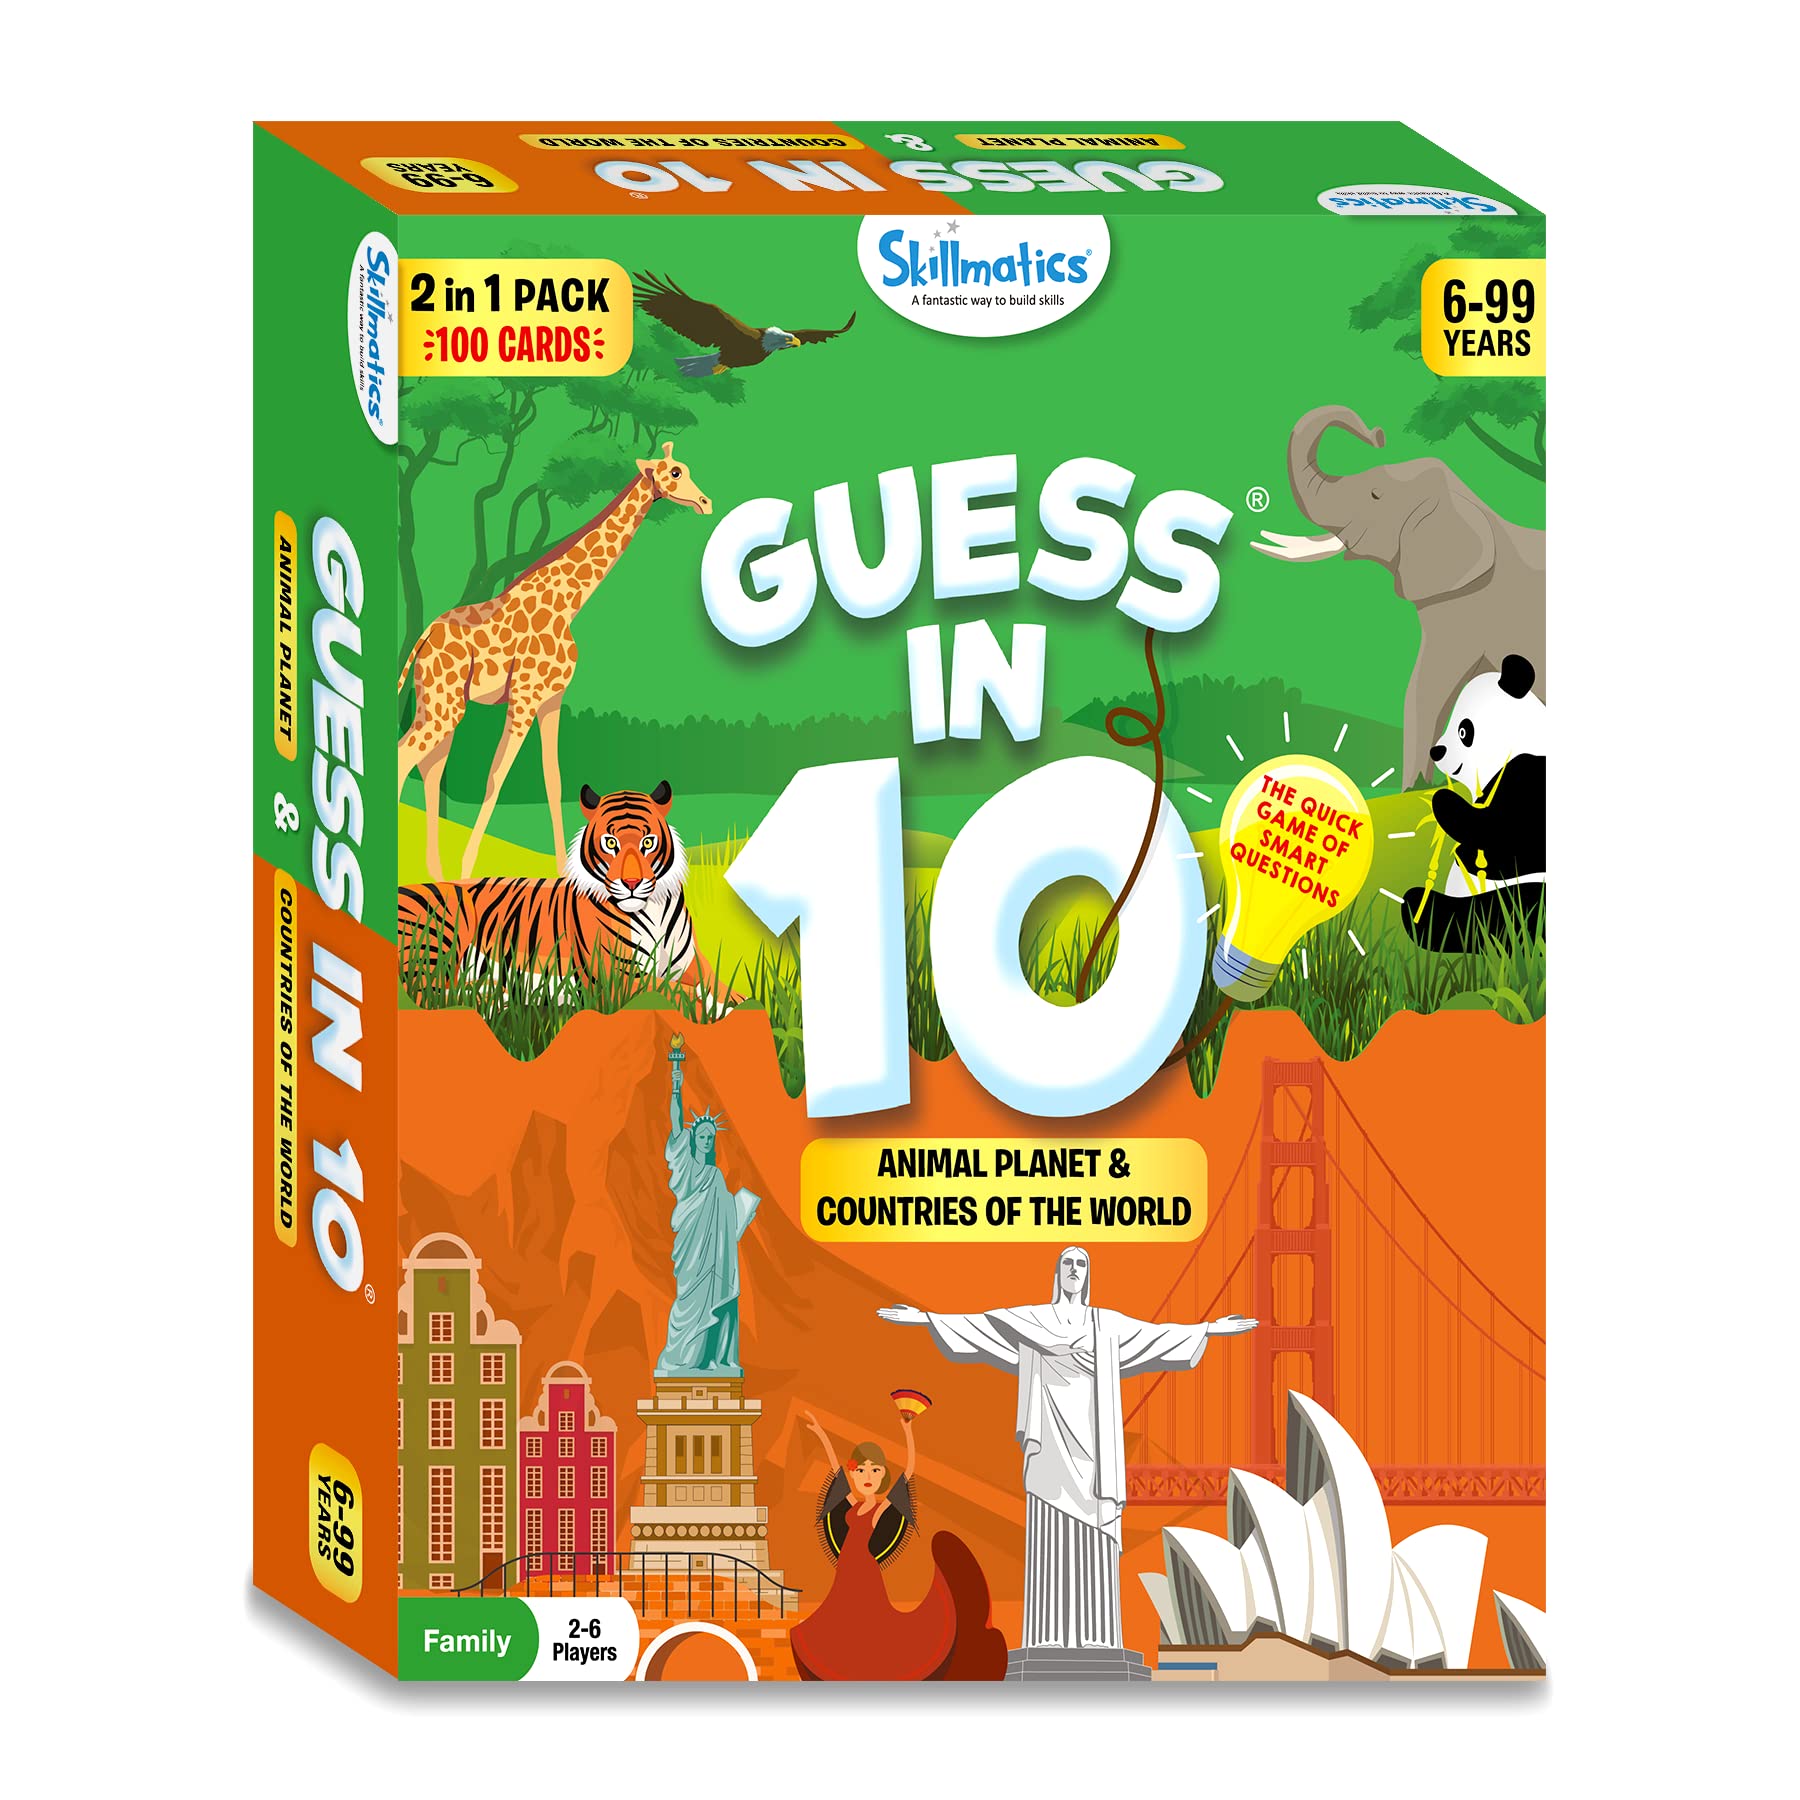 Skillmatics Card Game - Guess in 10 Animal & Countries Combo, Gifts for 6 Year Olds and Up, Quick Game of Smart Questions, Fun Family Game